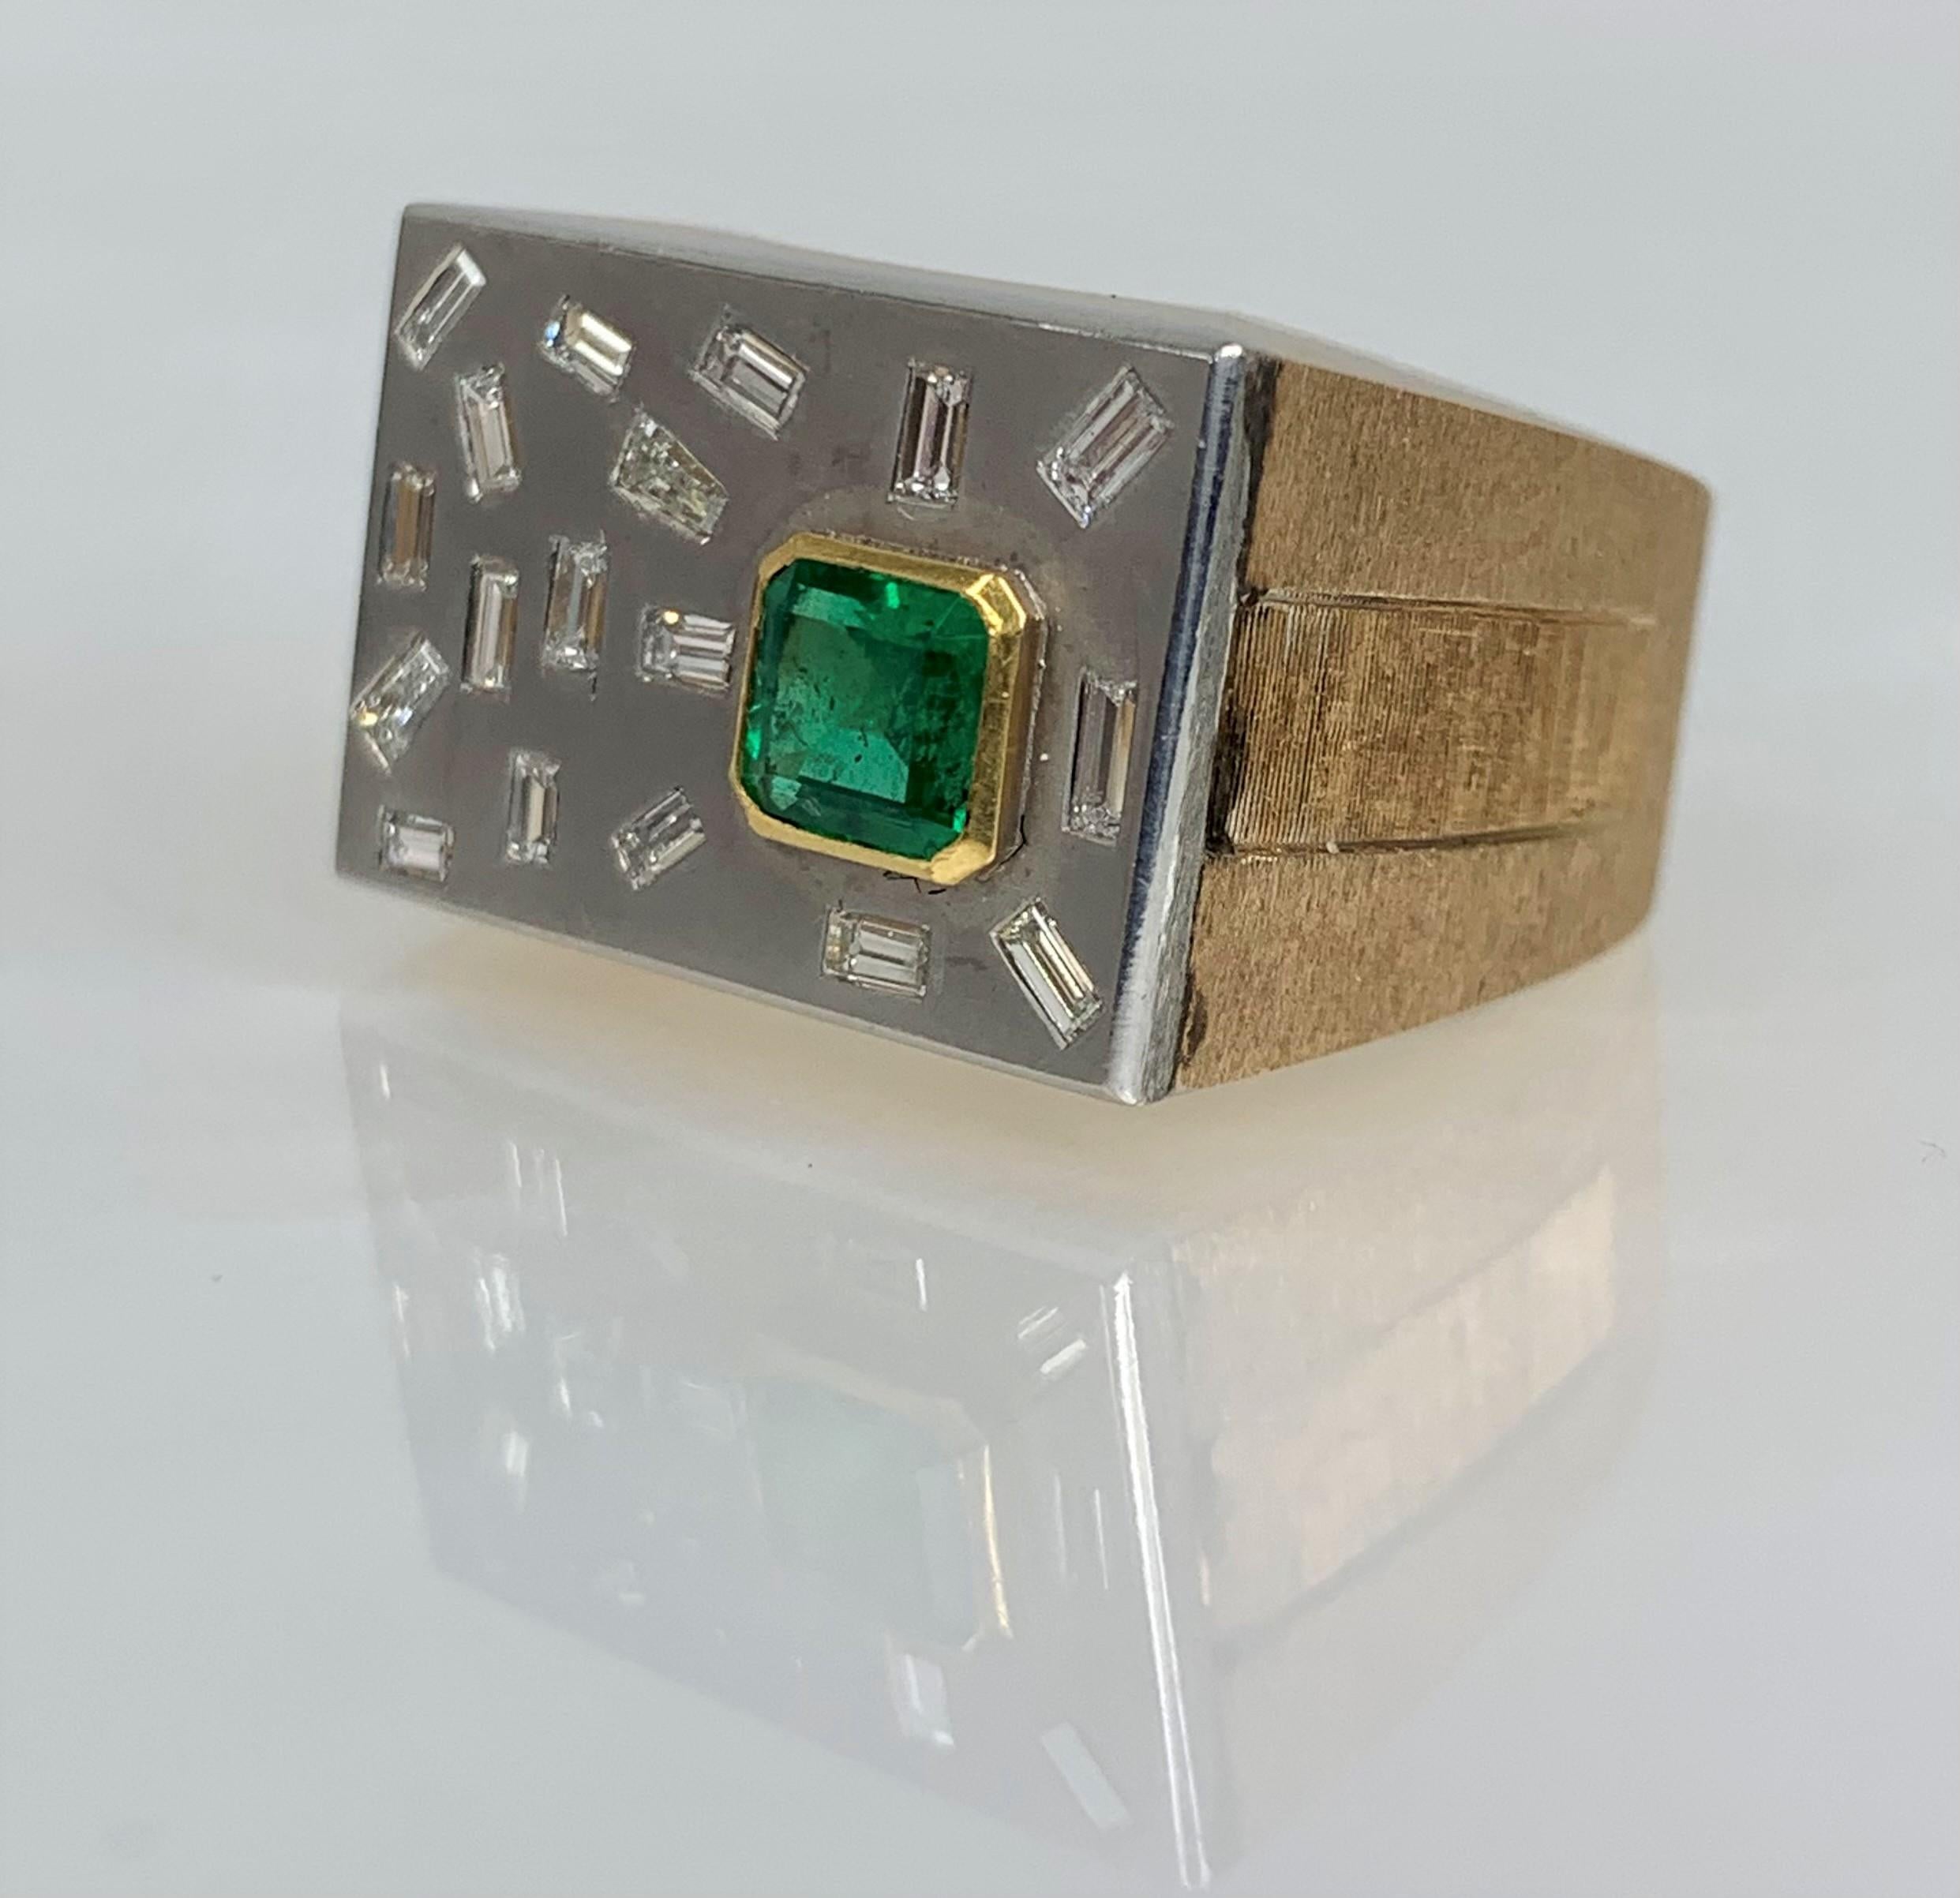 An exceptional one of a kind handmade ring reminiscent of a 